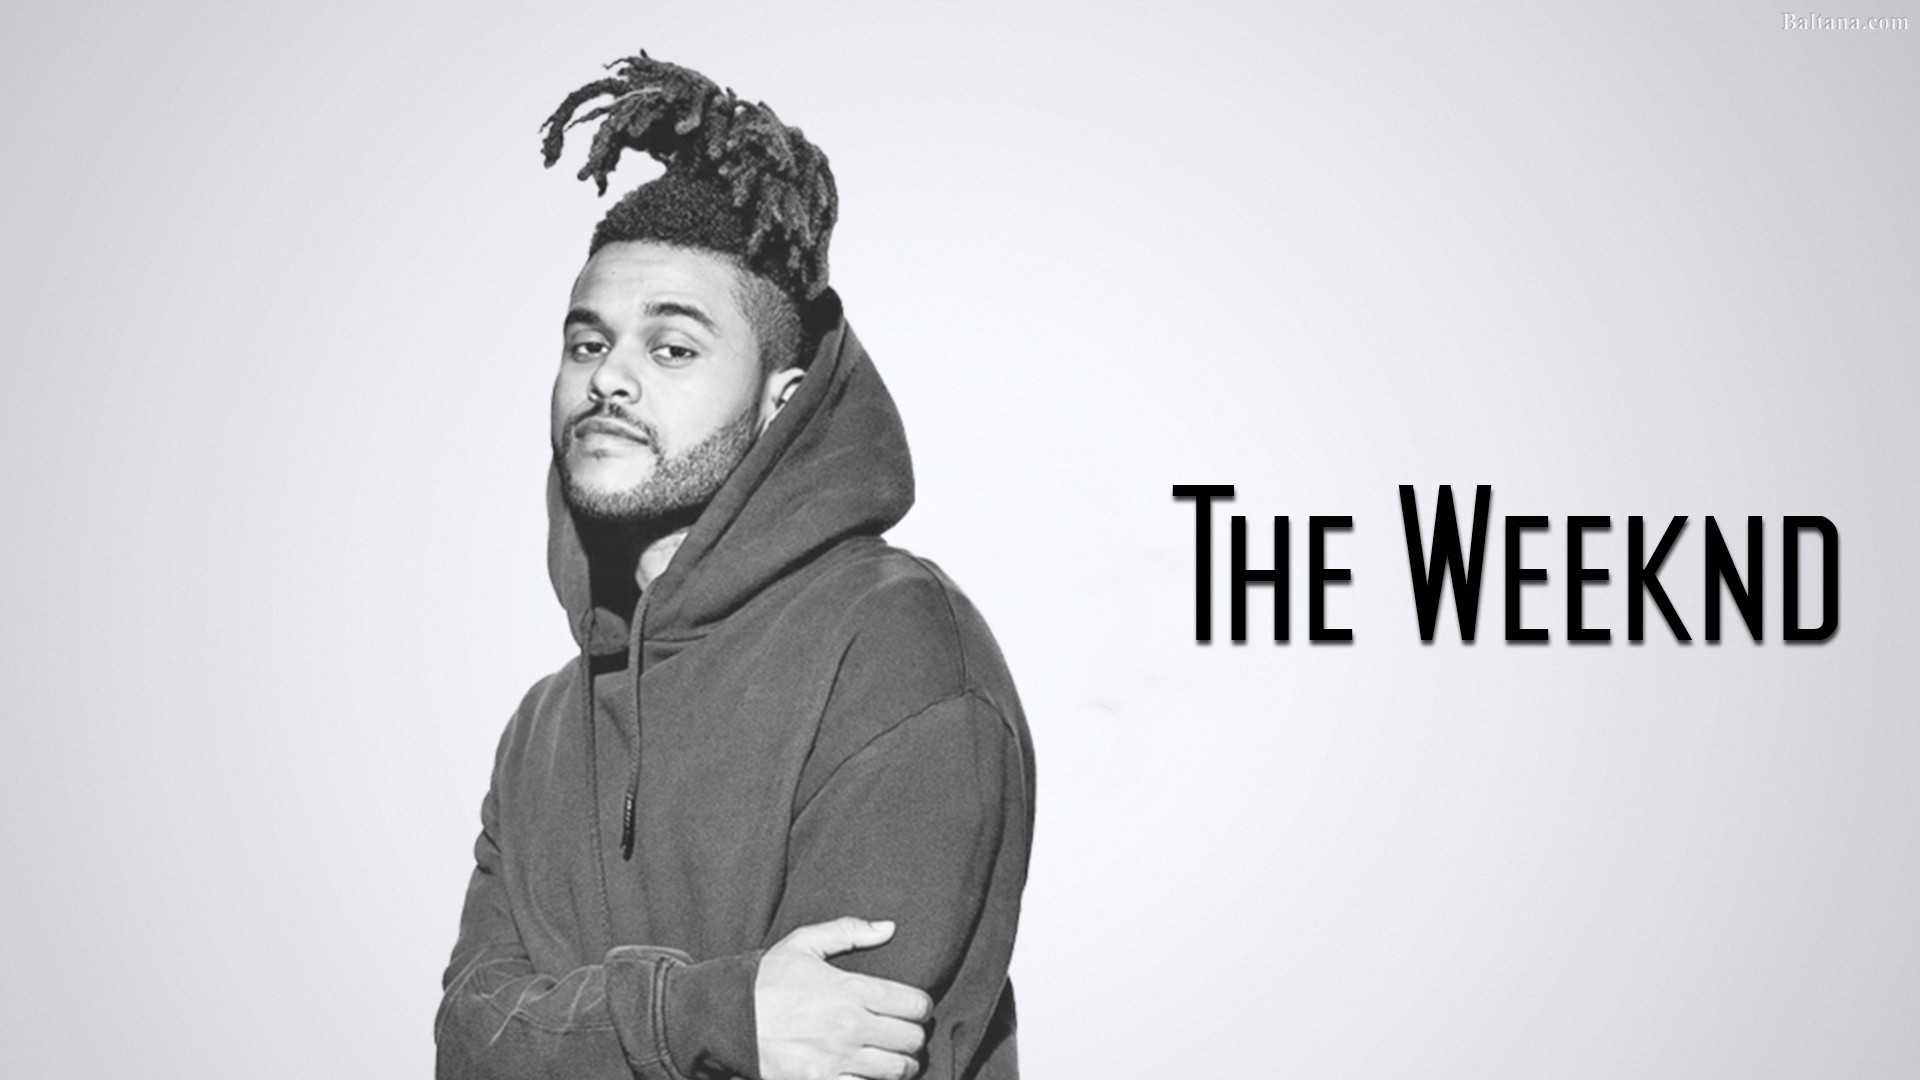 Thinking about the weekend. Группа weekend. The Weeknd. Певец the Weeknd. The Weeknd фотосессия.